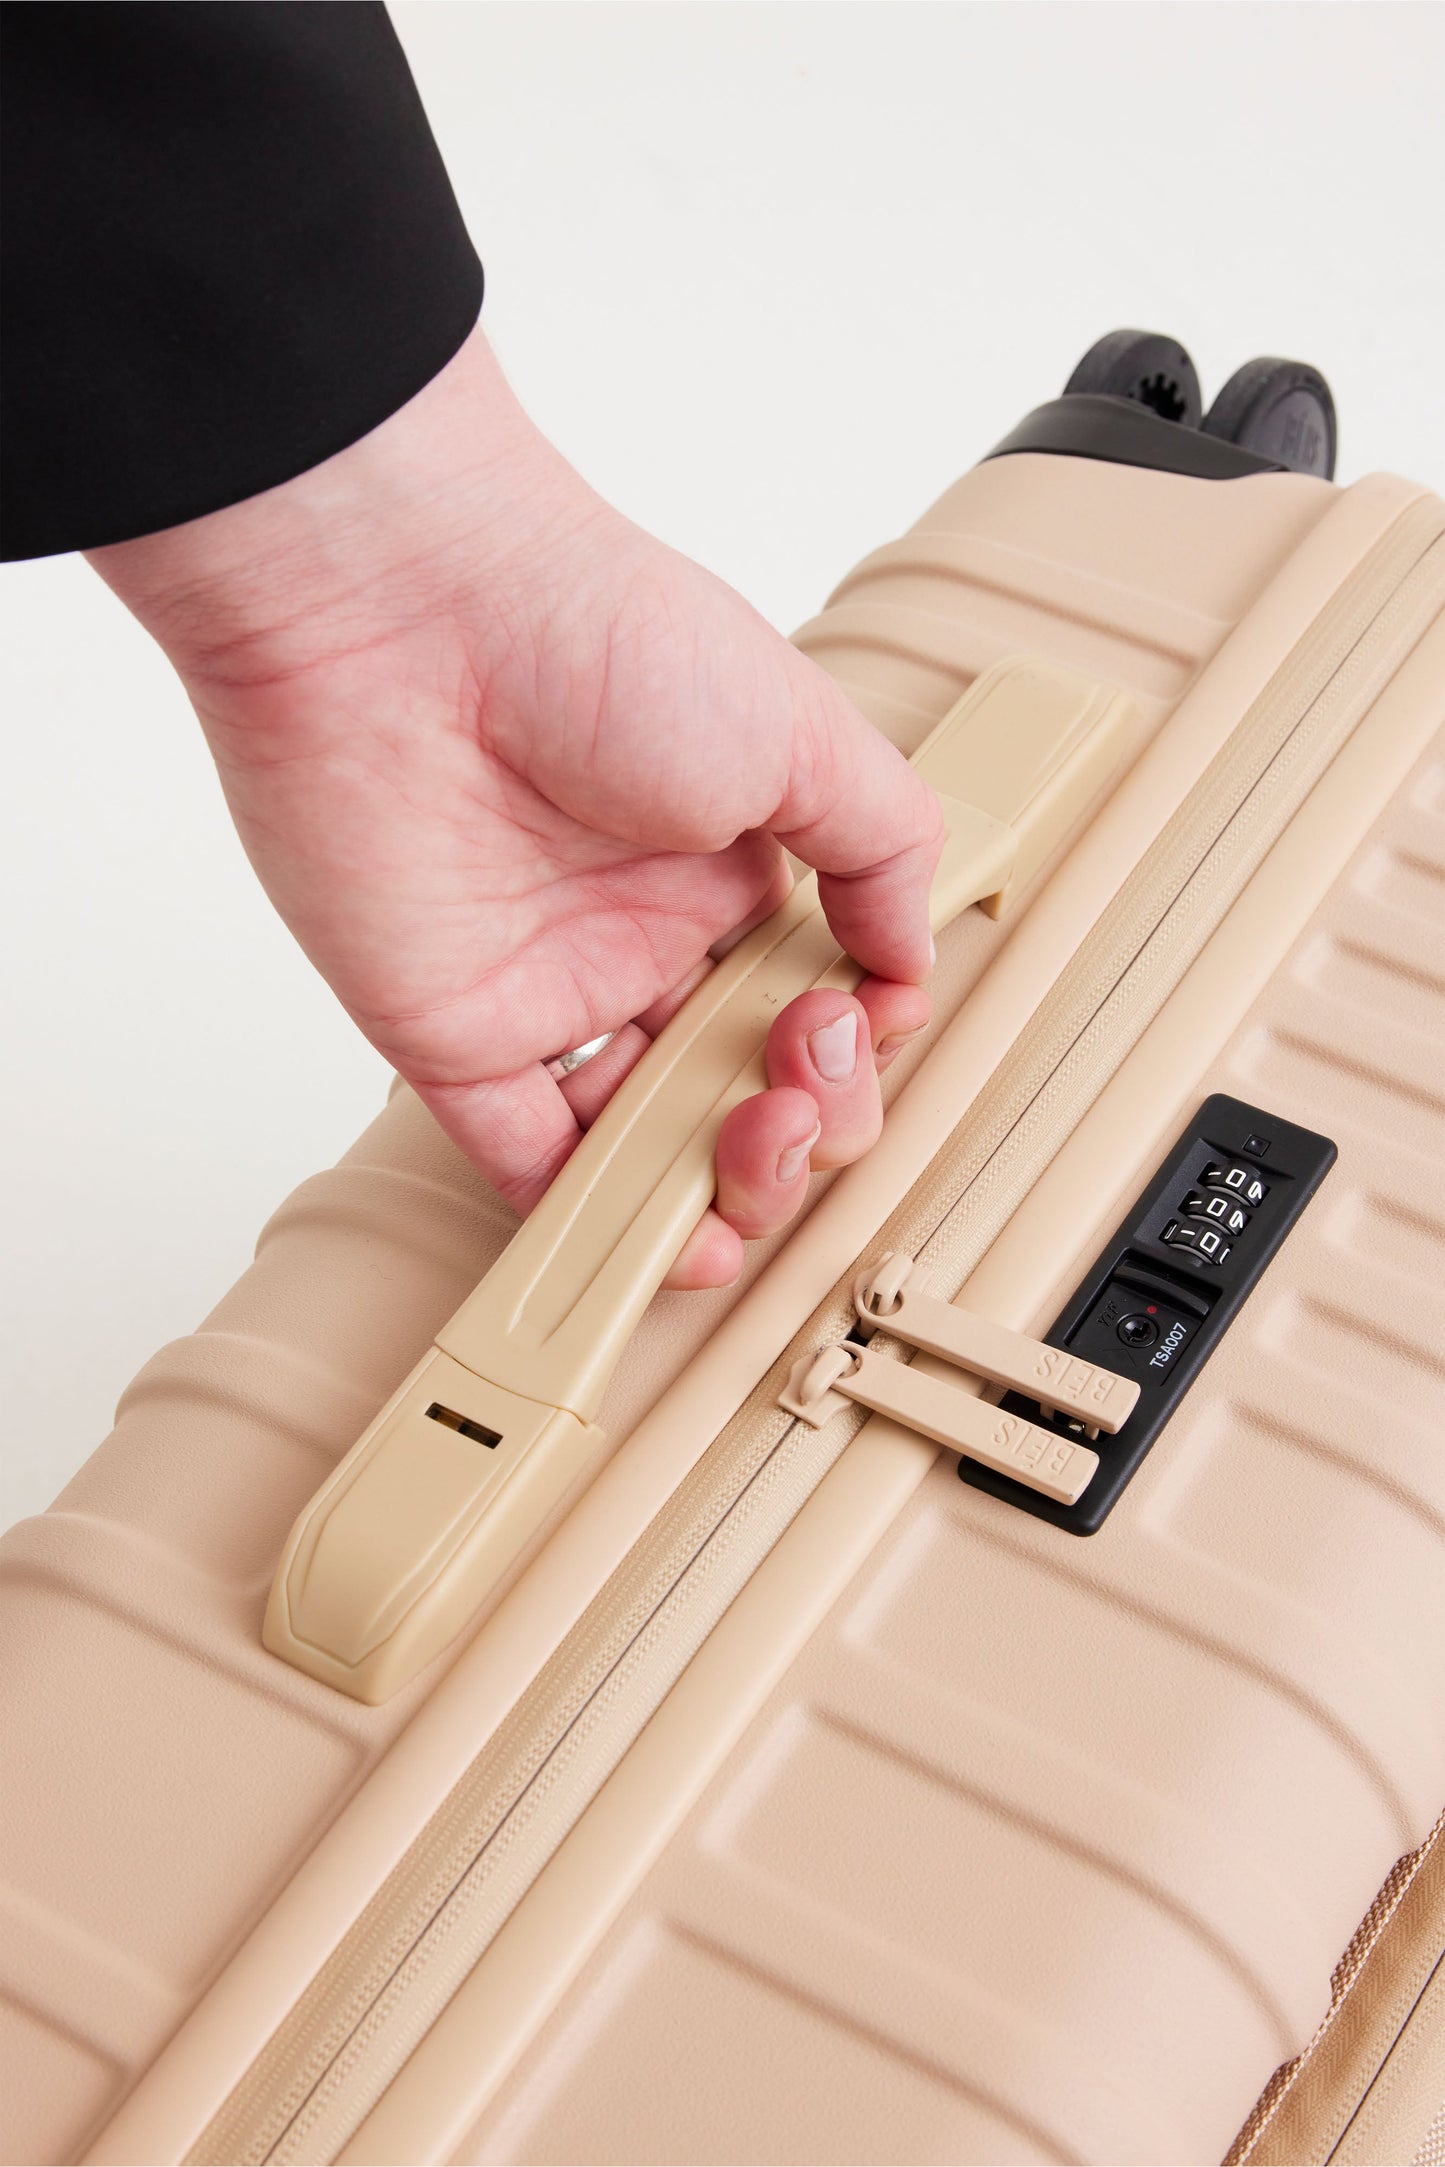 The Front Pocket Carry-On In Beige